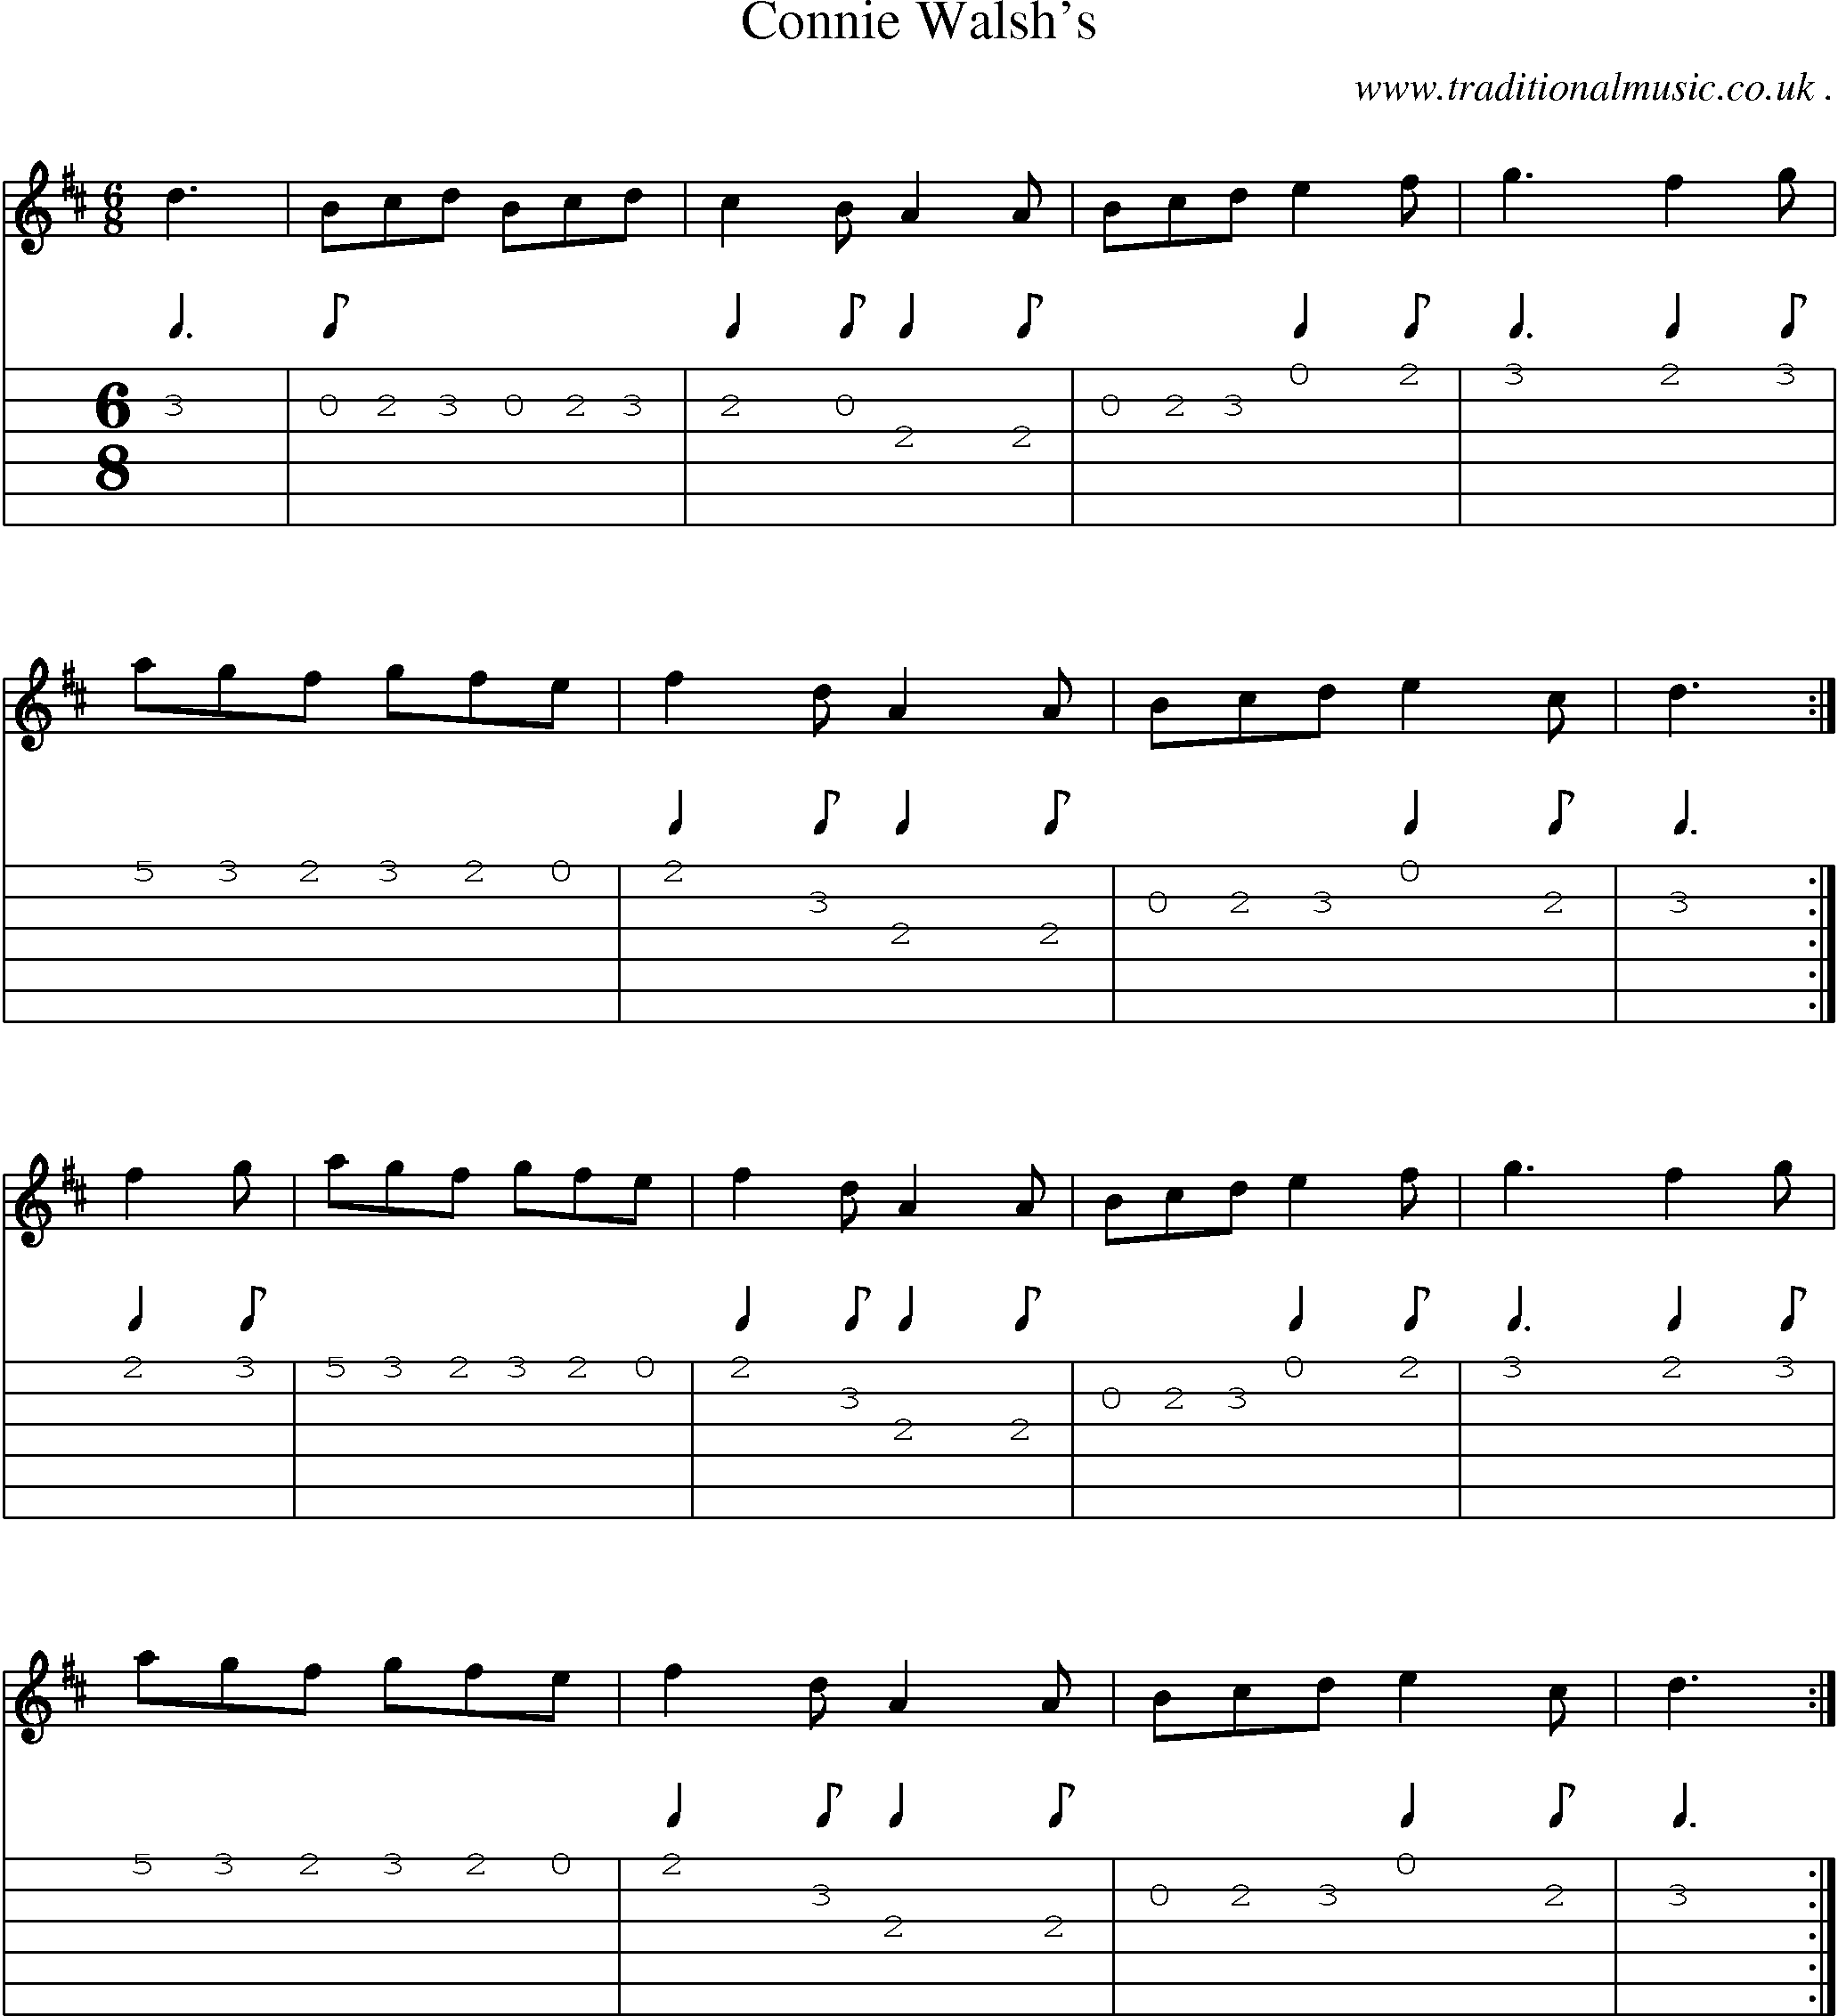 Sheet-Music and Guitar Tabs for Connie Walshs